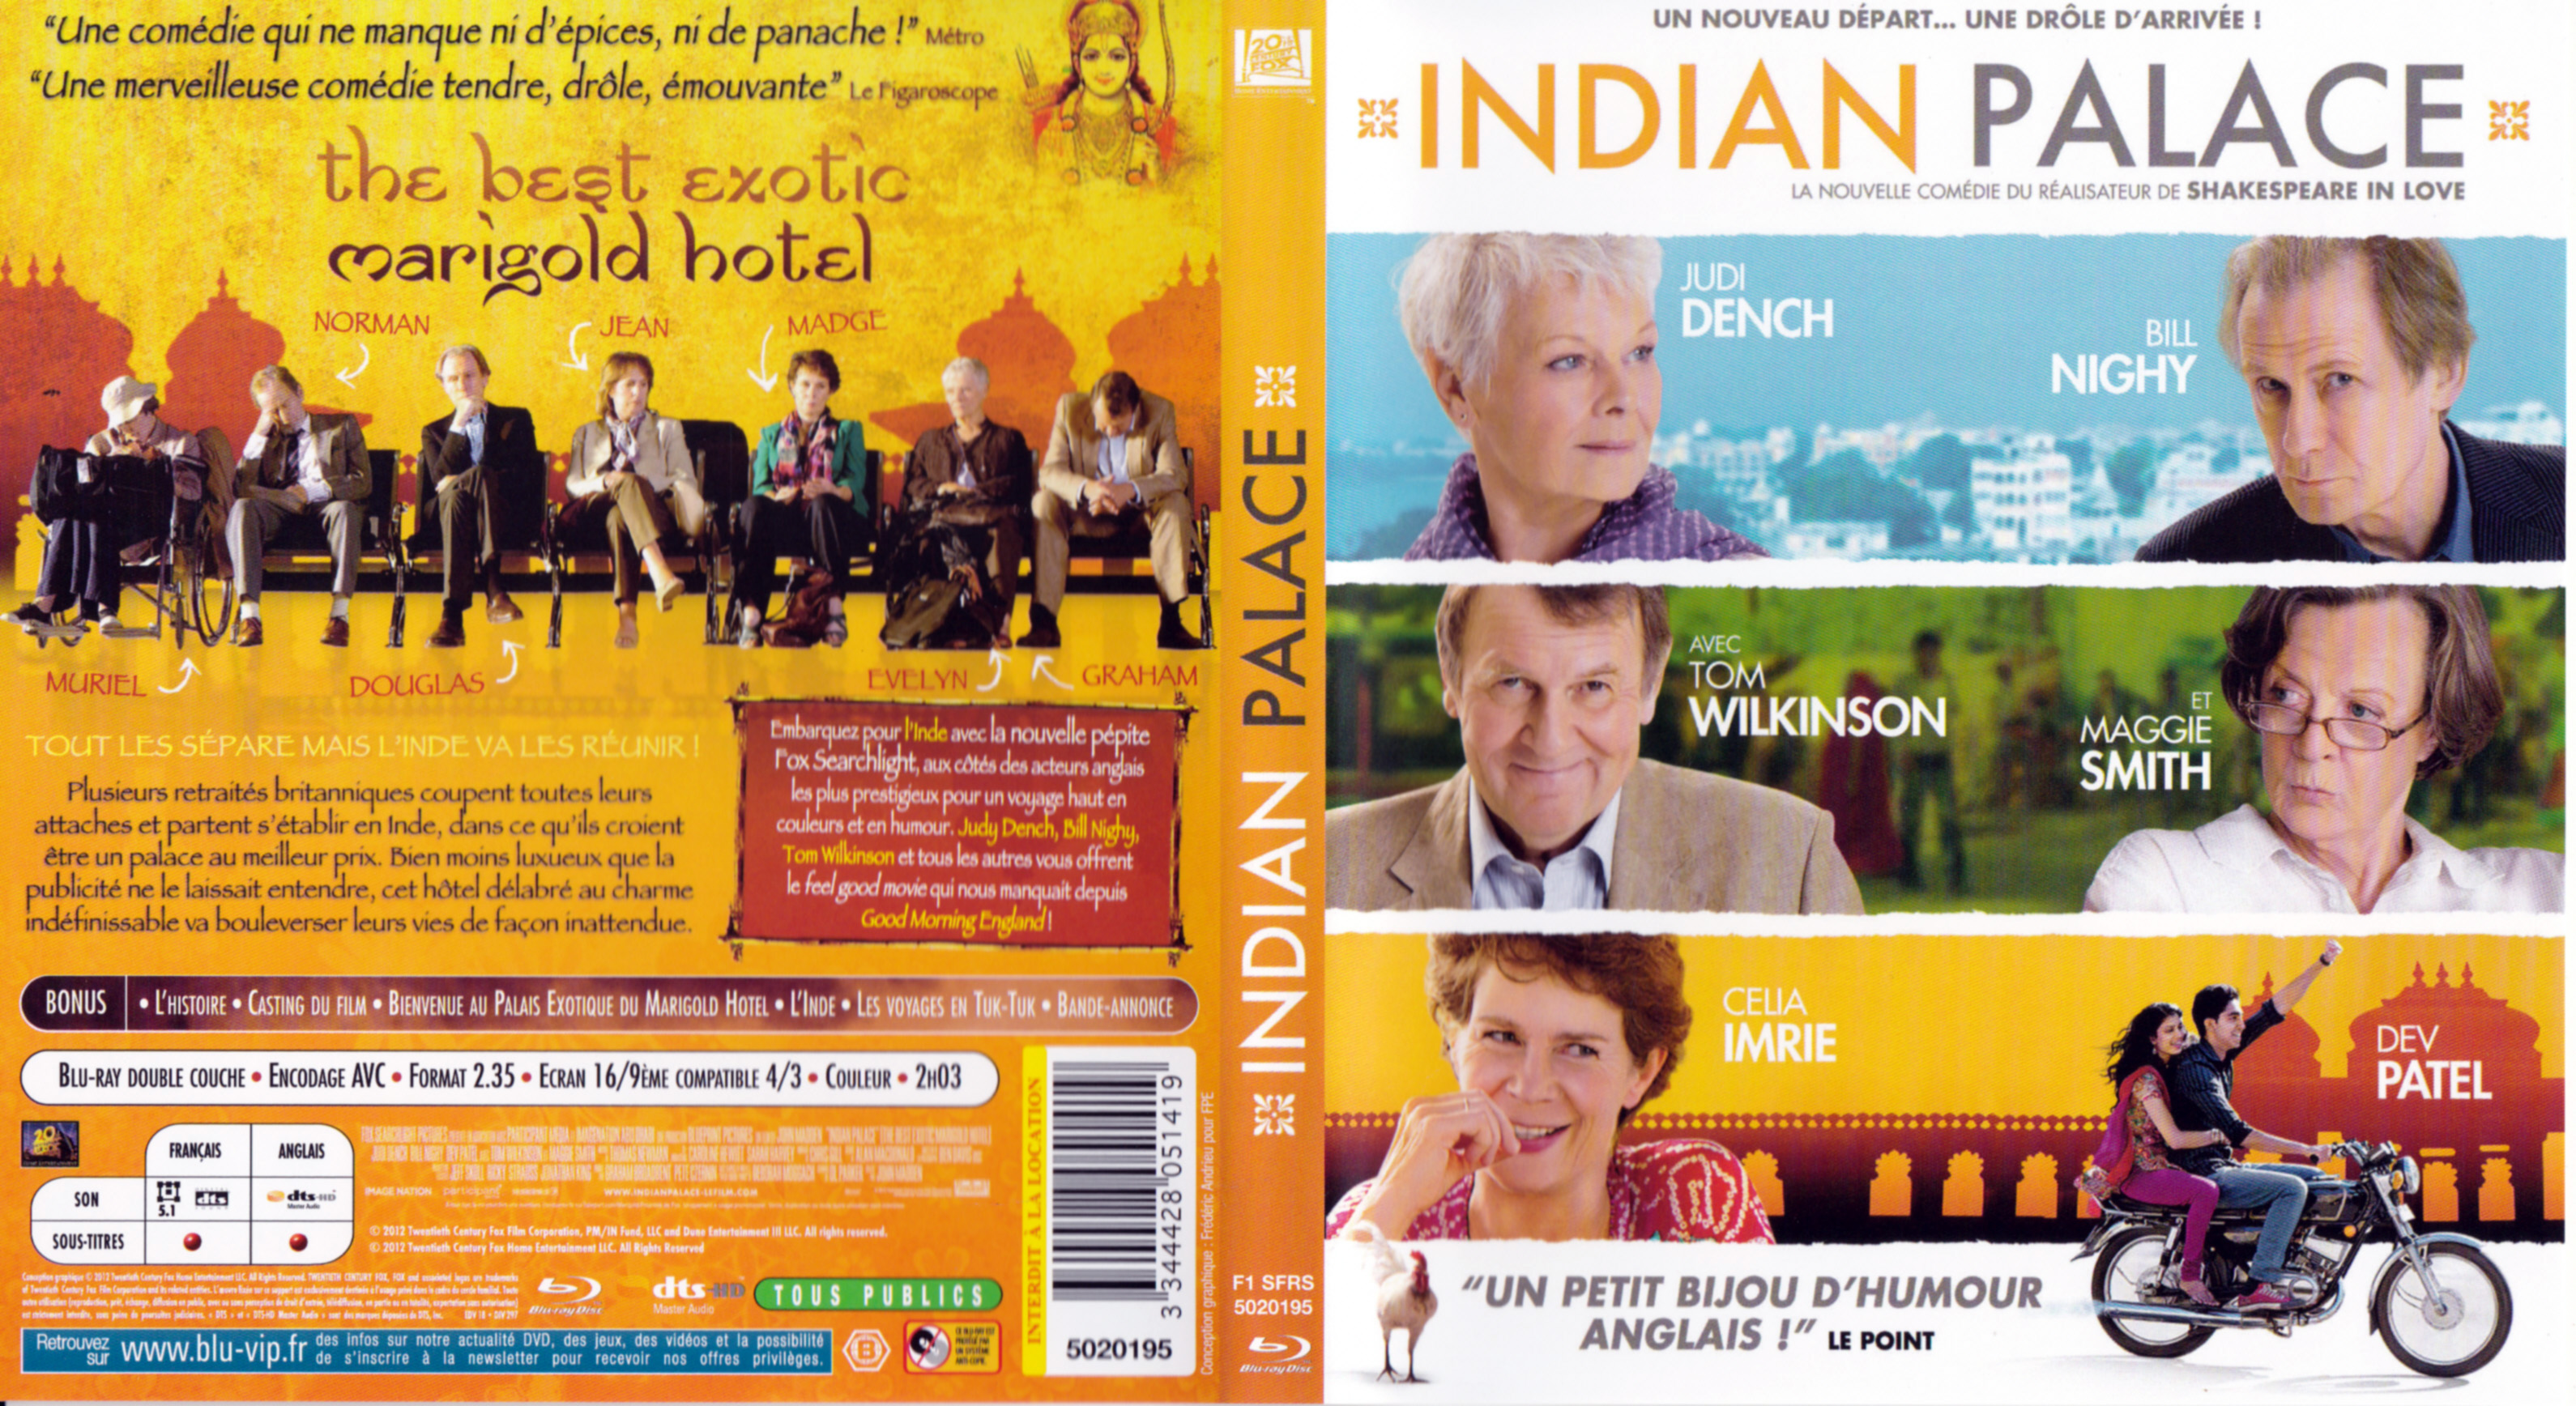 Jaquette DVD Indian Palace (BLU-RAY)